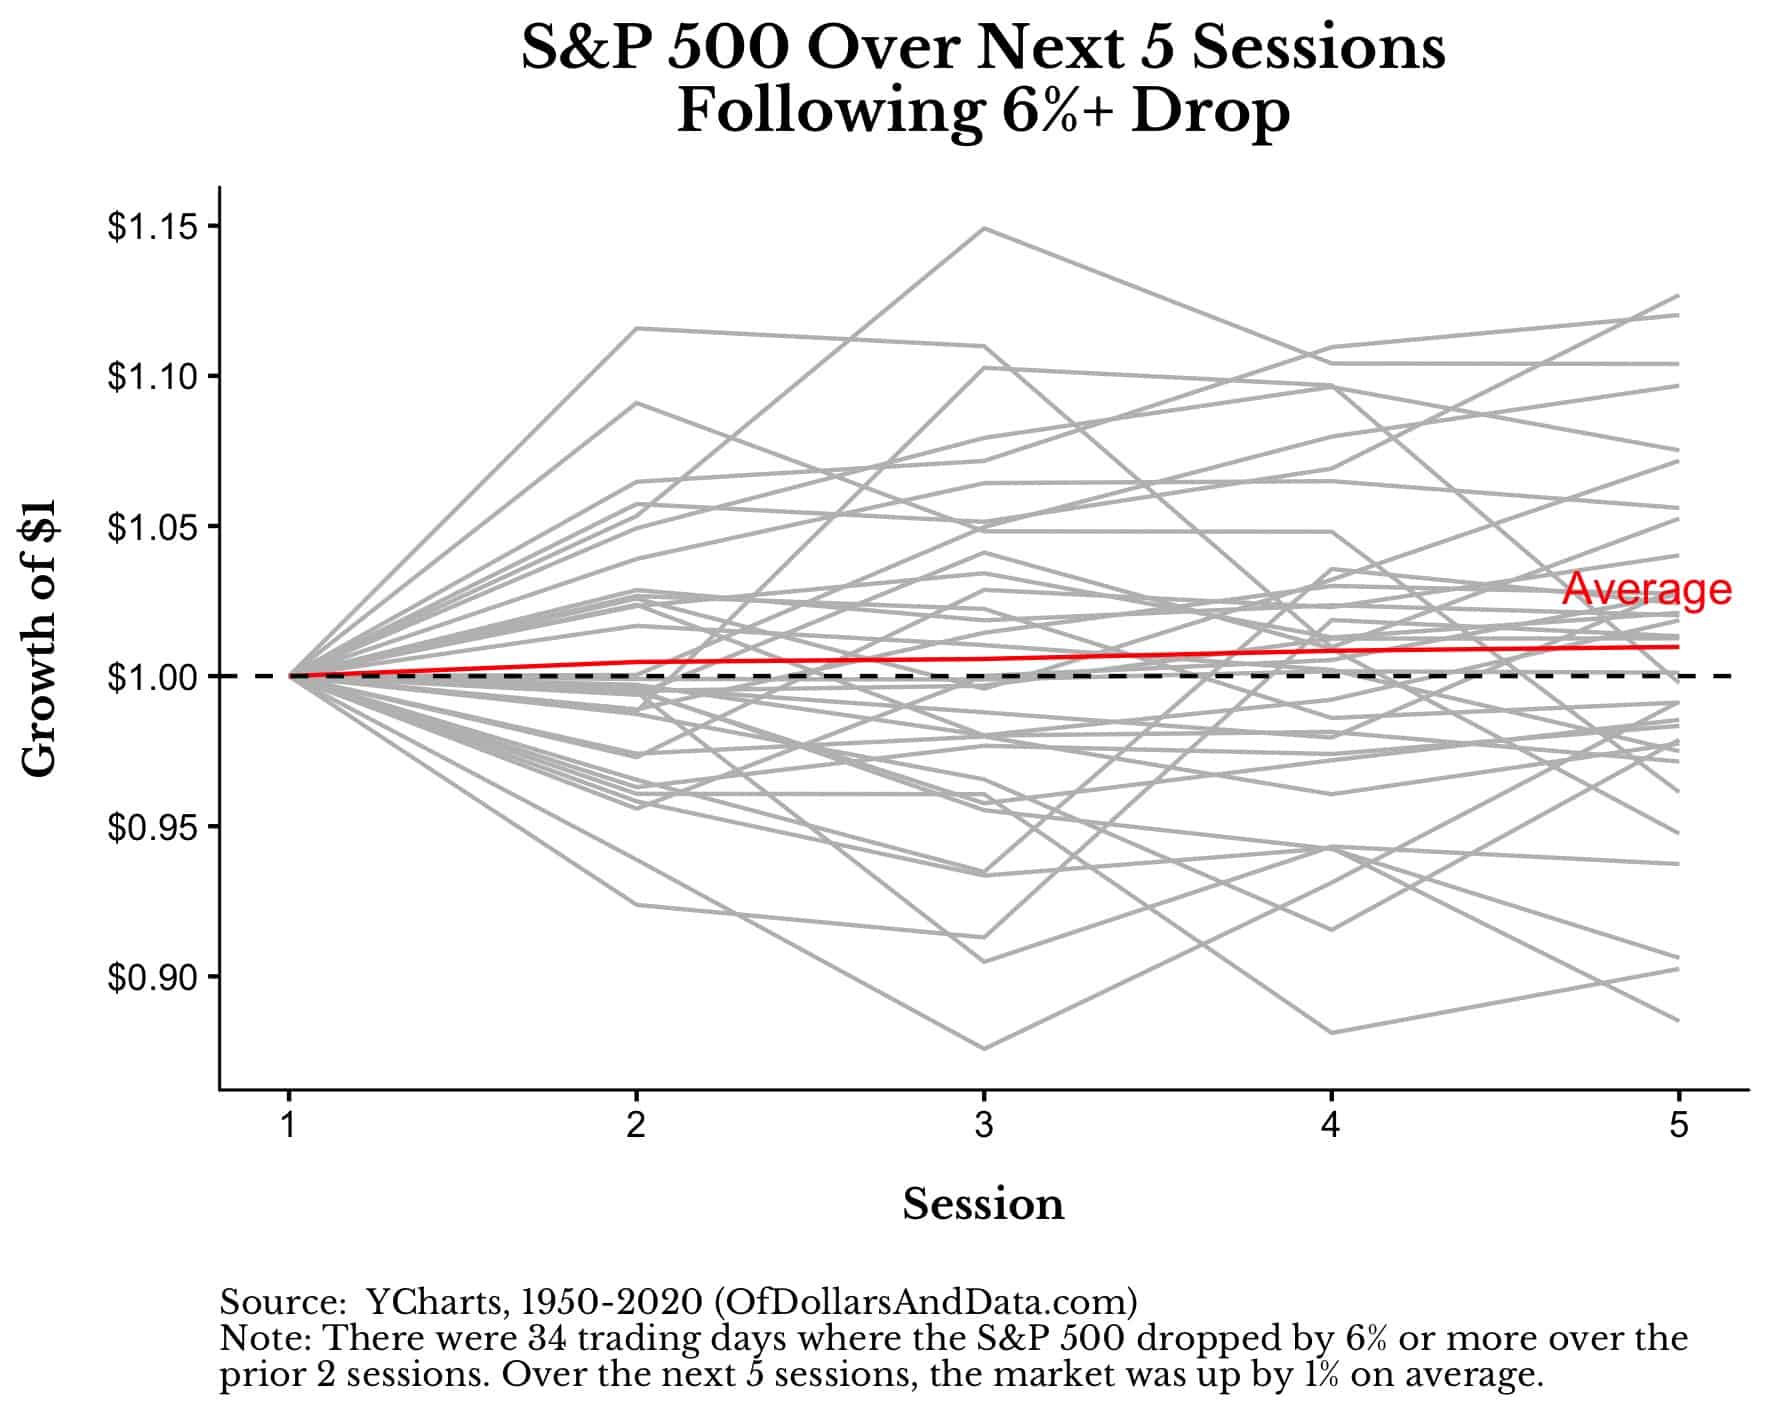 S&P 500 over next 5 sessions following a 6% or greater decline.